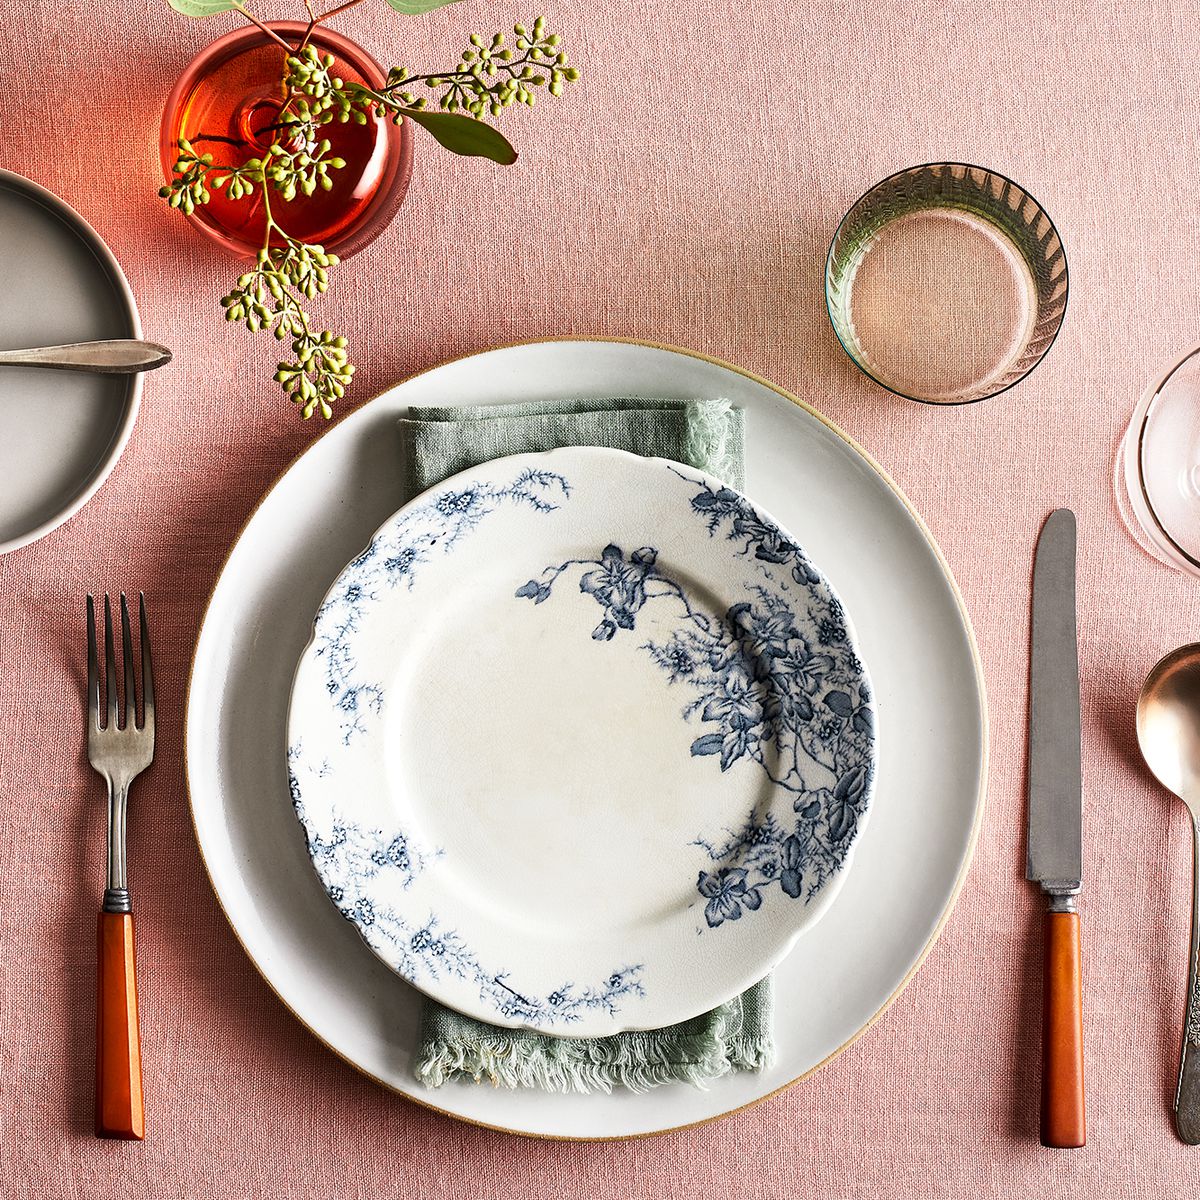 Set A Table Properly For Any Dinner, How To Set A Table For Dinner Napkin Placement